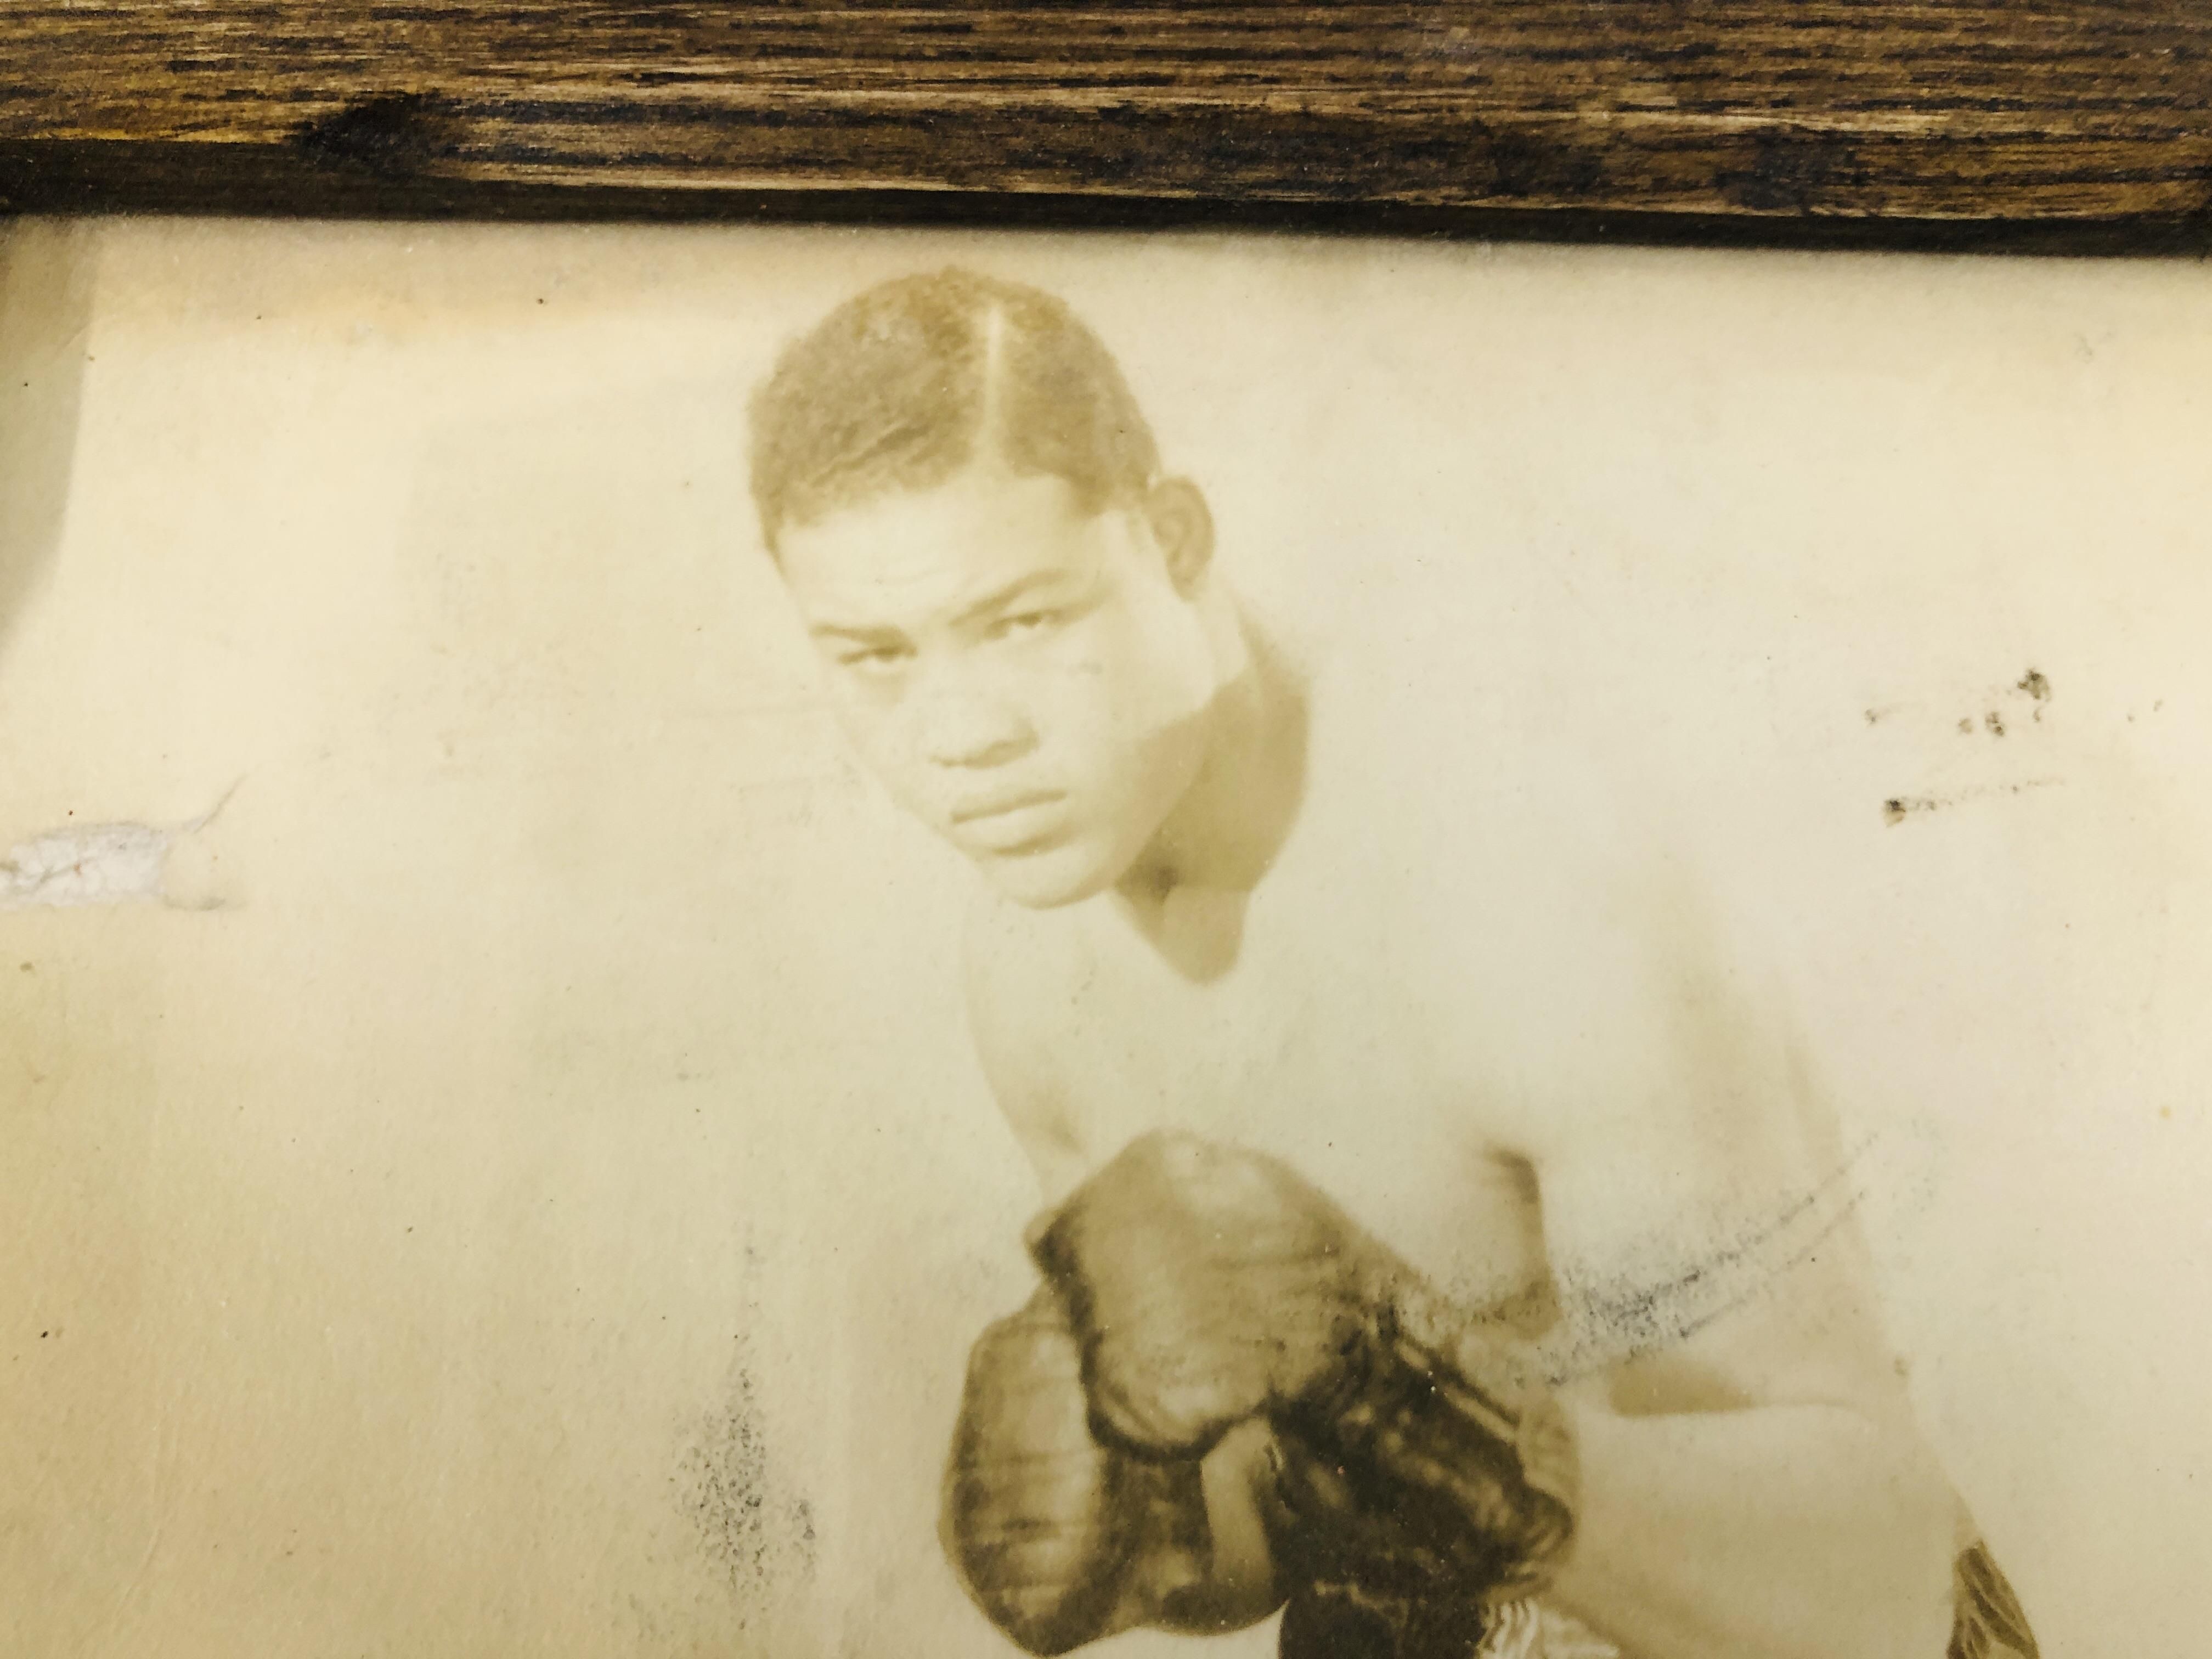 SIGNED VINTAGE PHOTOGRAPH BEARING SIGNATURE "JOE LOUIS" YOURS TRULY, H 22CM X W 16.5CM. - Image 3 of 5